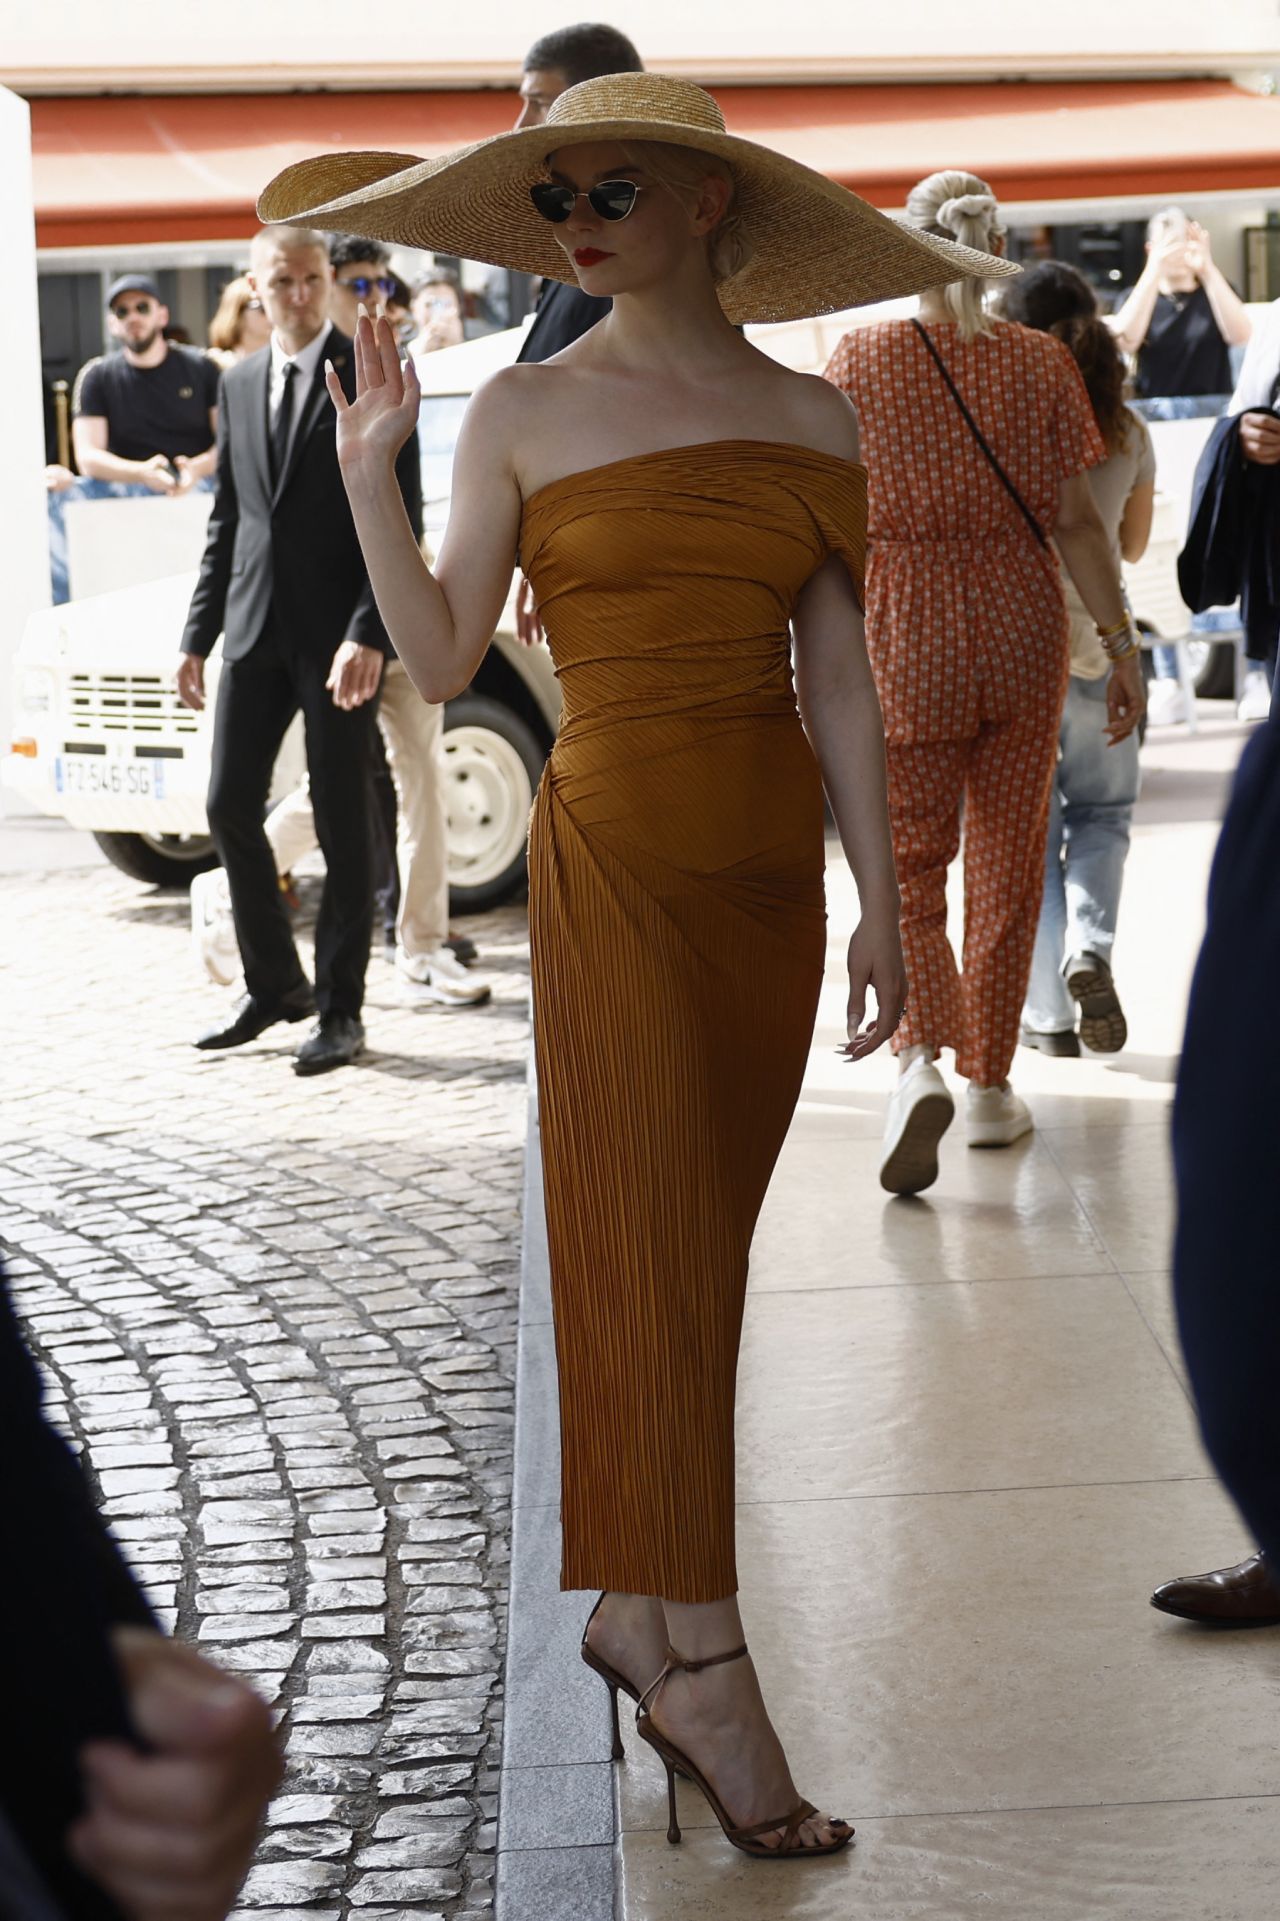 ANYA TAYLOR JOY AT HOTEL MARTINEZ IN CANNES2